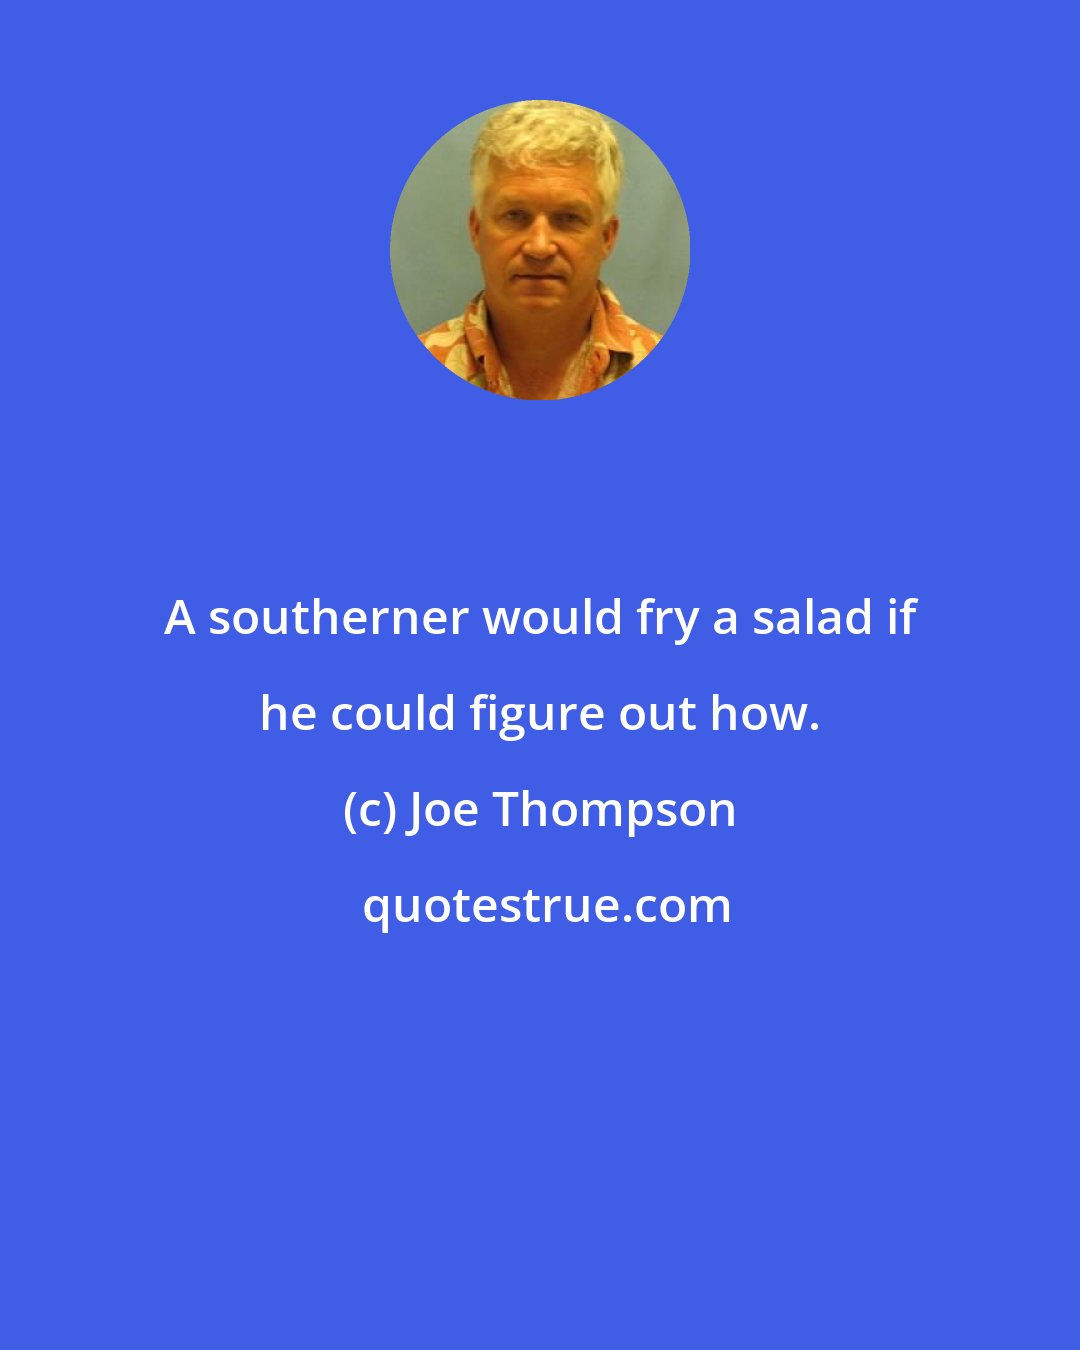 Joe Thompson: A southerner would fry a salad if he could figure out how.